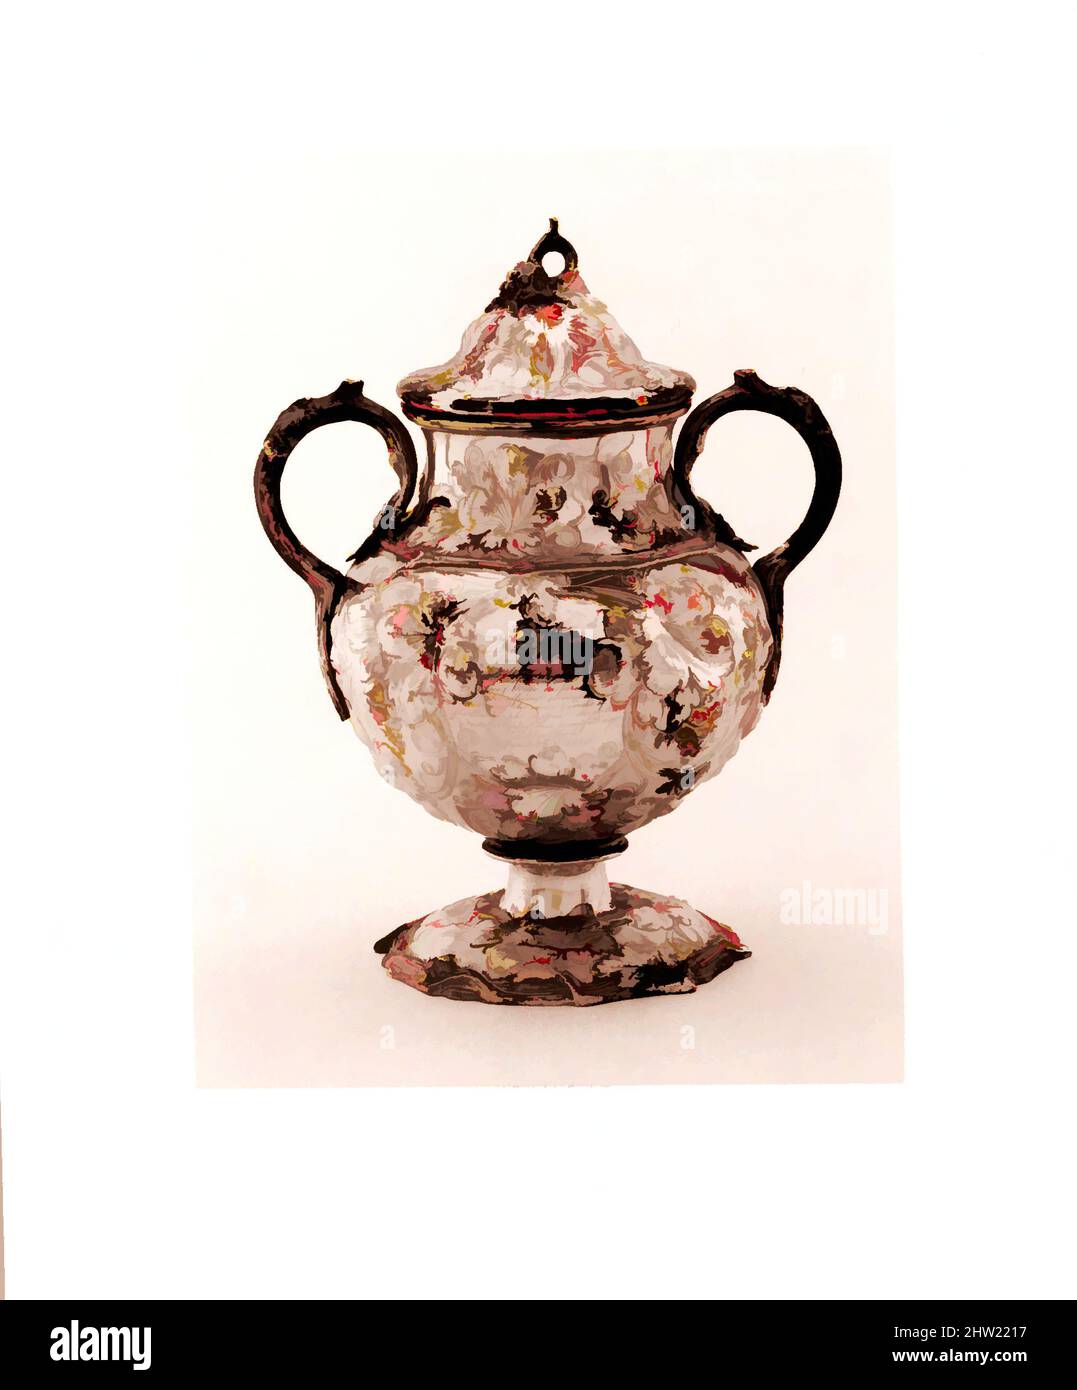 Art inspired by Sugar Bowl, 1850, Made in New York, New York, United States, American, Silver, Overall: 8 15/16 x 7 1/8 x 5 5/16 in. (22.7 x 18.1 x 13.5 cm); 25 oz. (776.9 g), Silver, John C. Moore (ca. 1802–1874), In 1850, Marshall Lefferts, president of the New York and New England, Classic works modernized by Artotop with a splash of modernity. Shapes, color and value, eye-catching visual impact on art. Emotions through freedom of artworks in a contemporary way. A timeless message pursuing a wildly creative new direction. Artists turning to the digital medium and creating the Artotop NFT Stock Photo